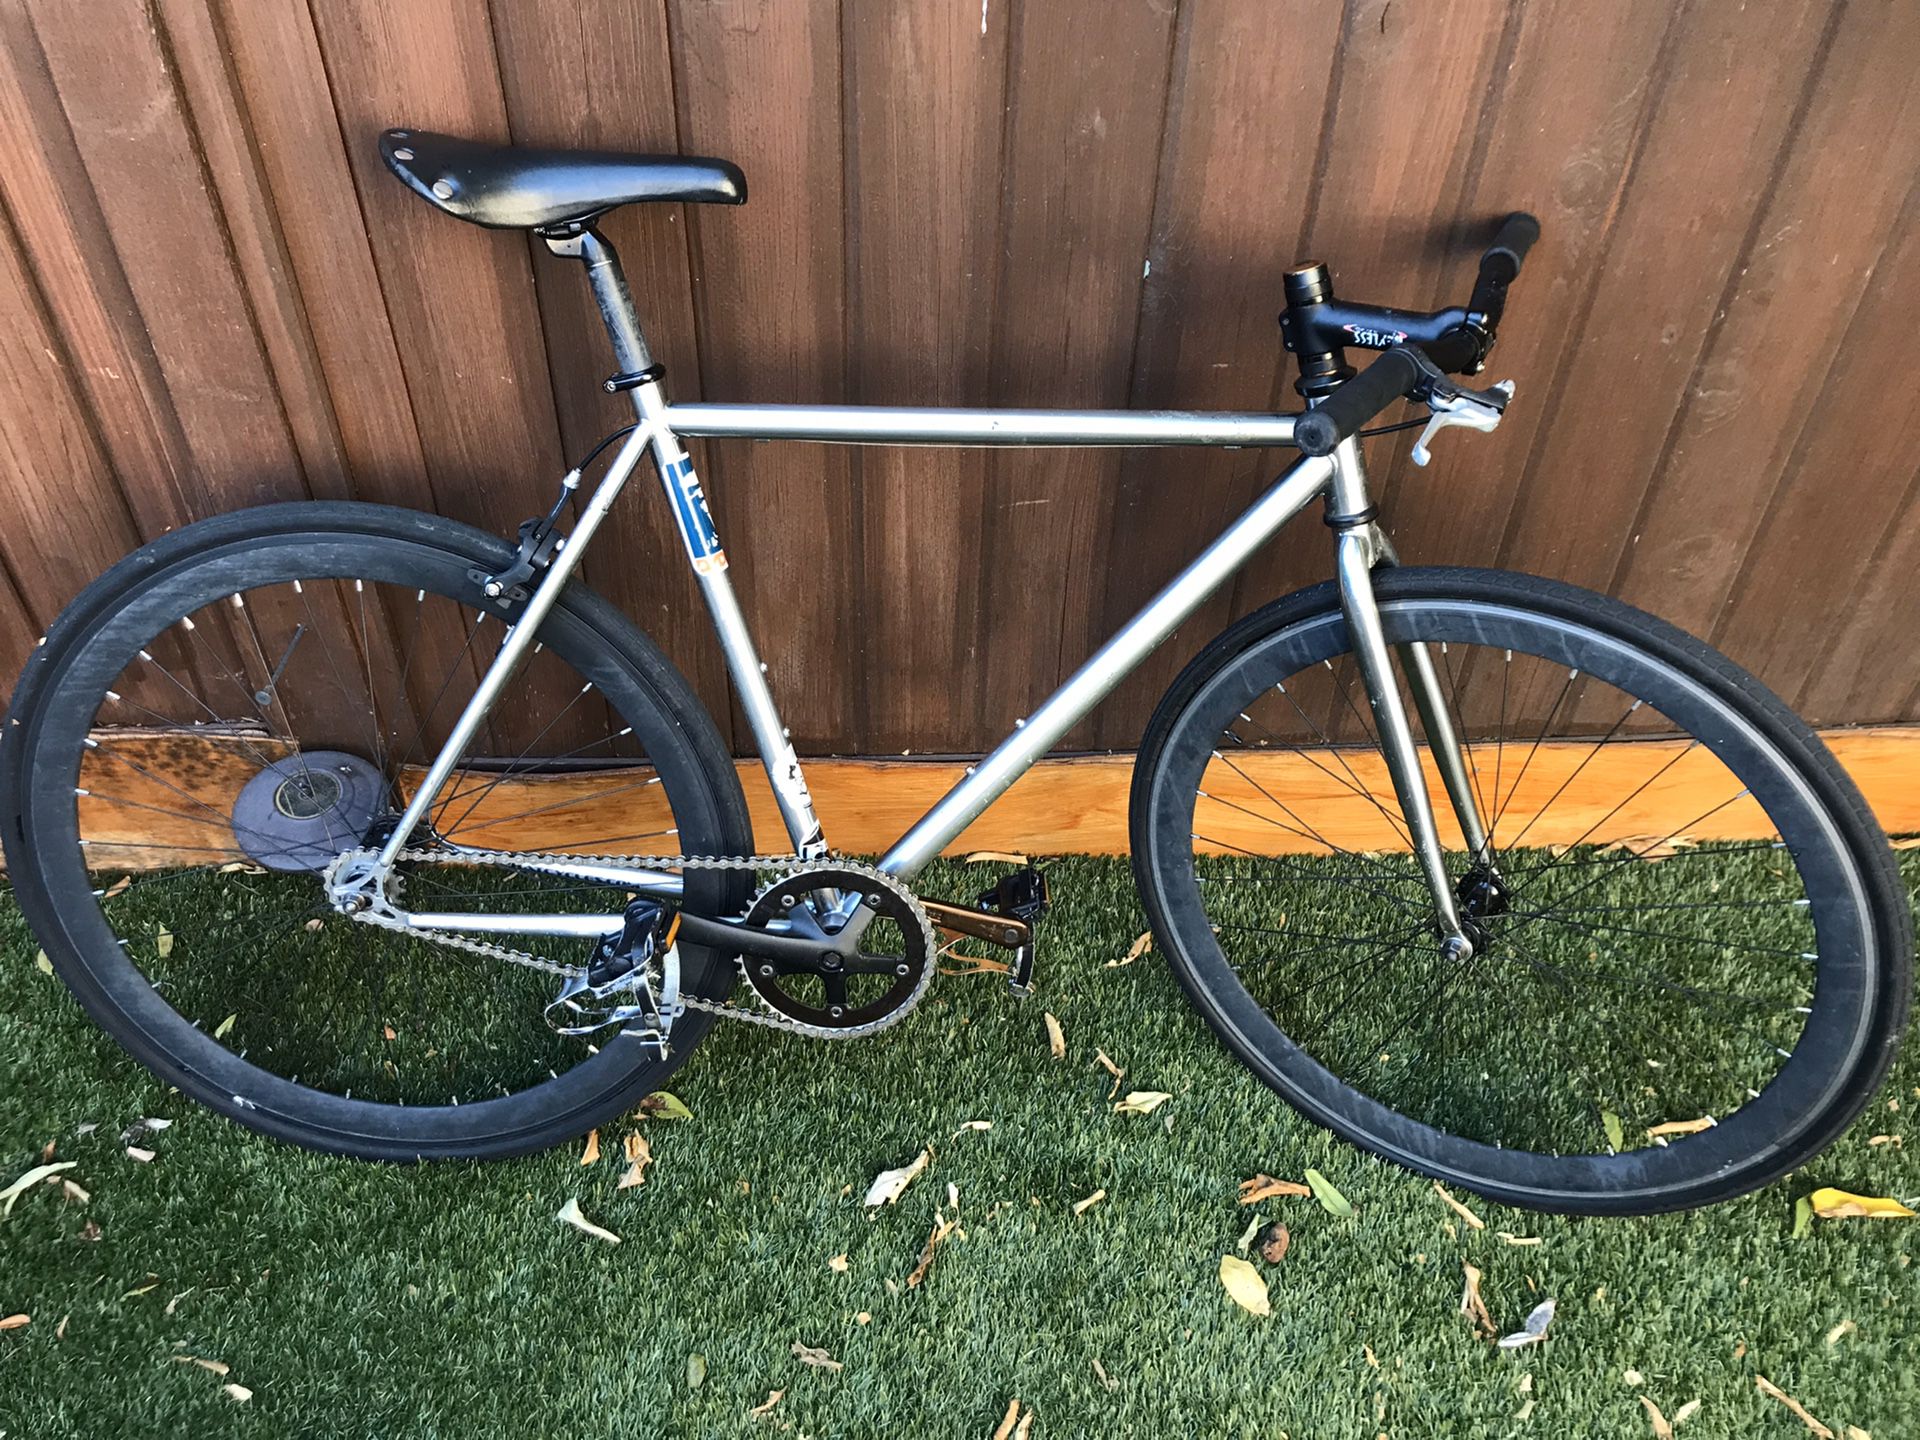 Single speed bicycle